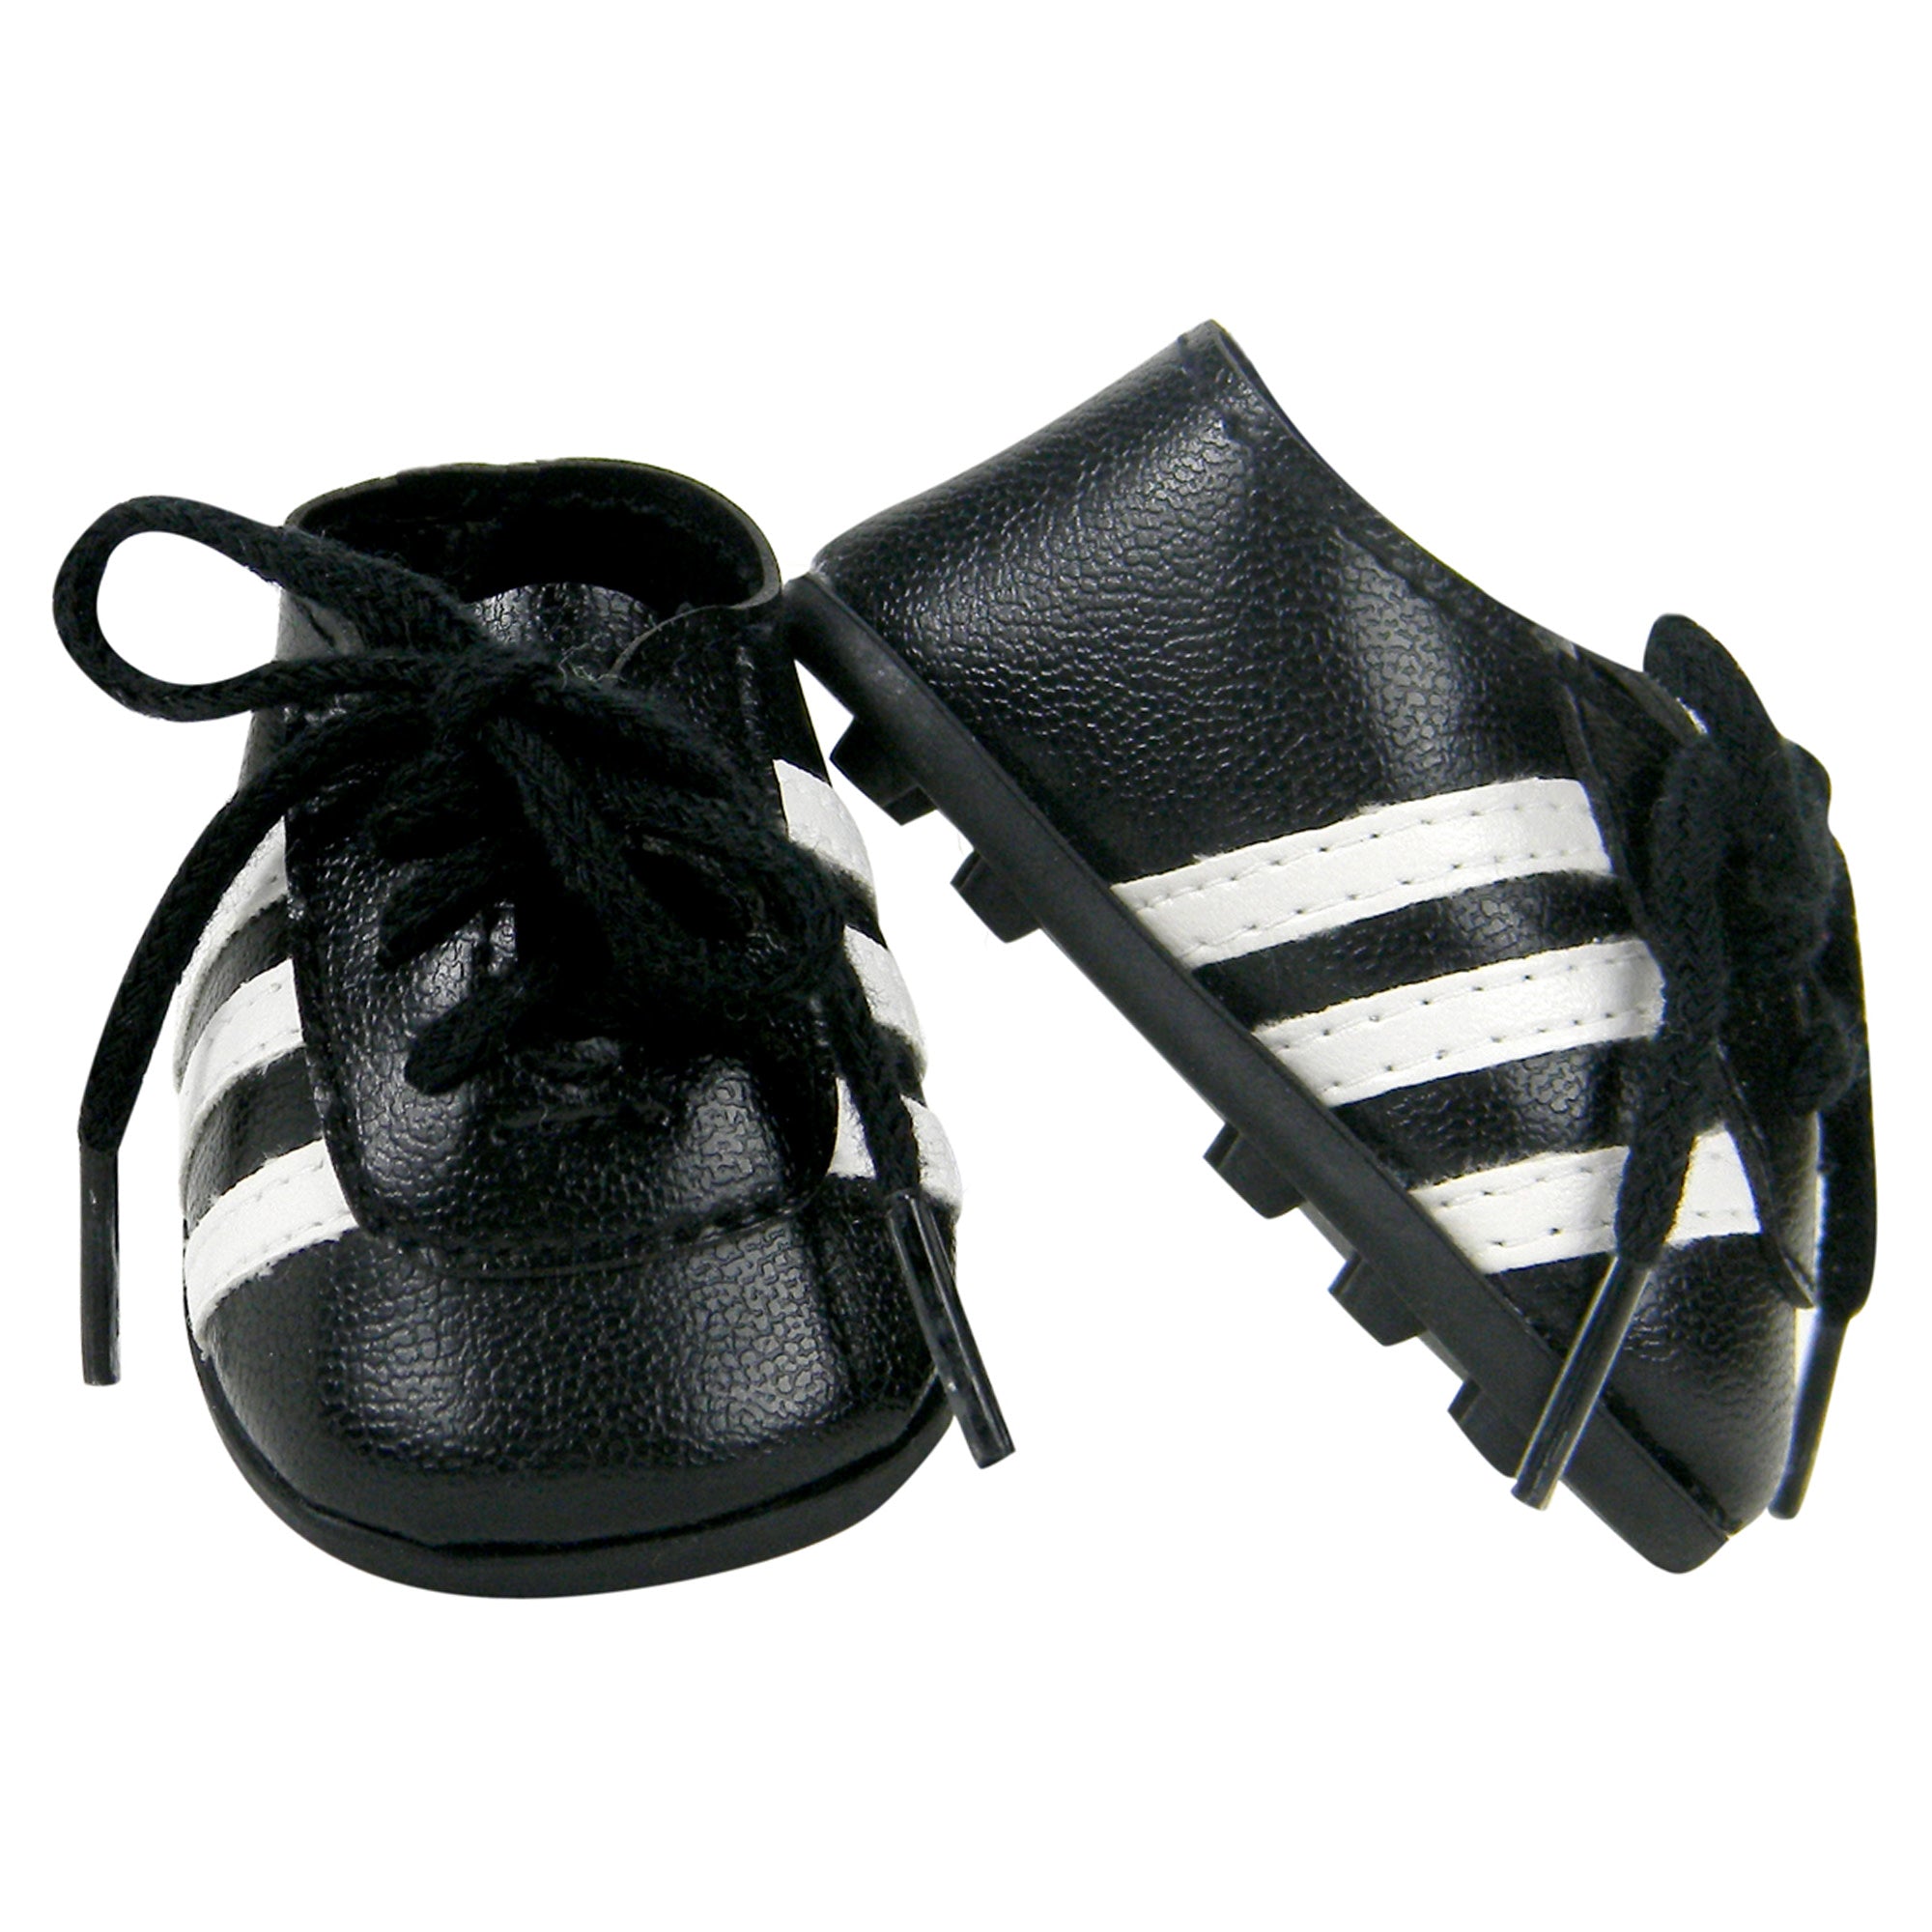 Sophia’s Cute Classic Faux Leather Football Soccer Cleat Shoes with White Striped Accents & Realistic Shoelaces for 18” Dolls, Fuchsia